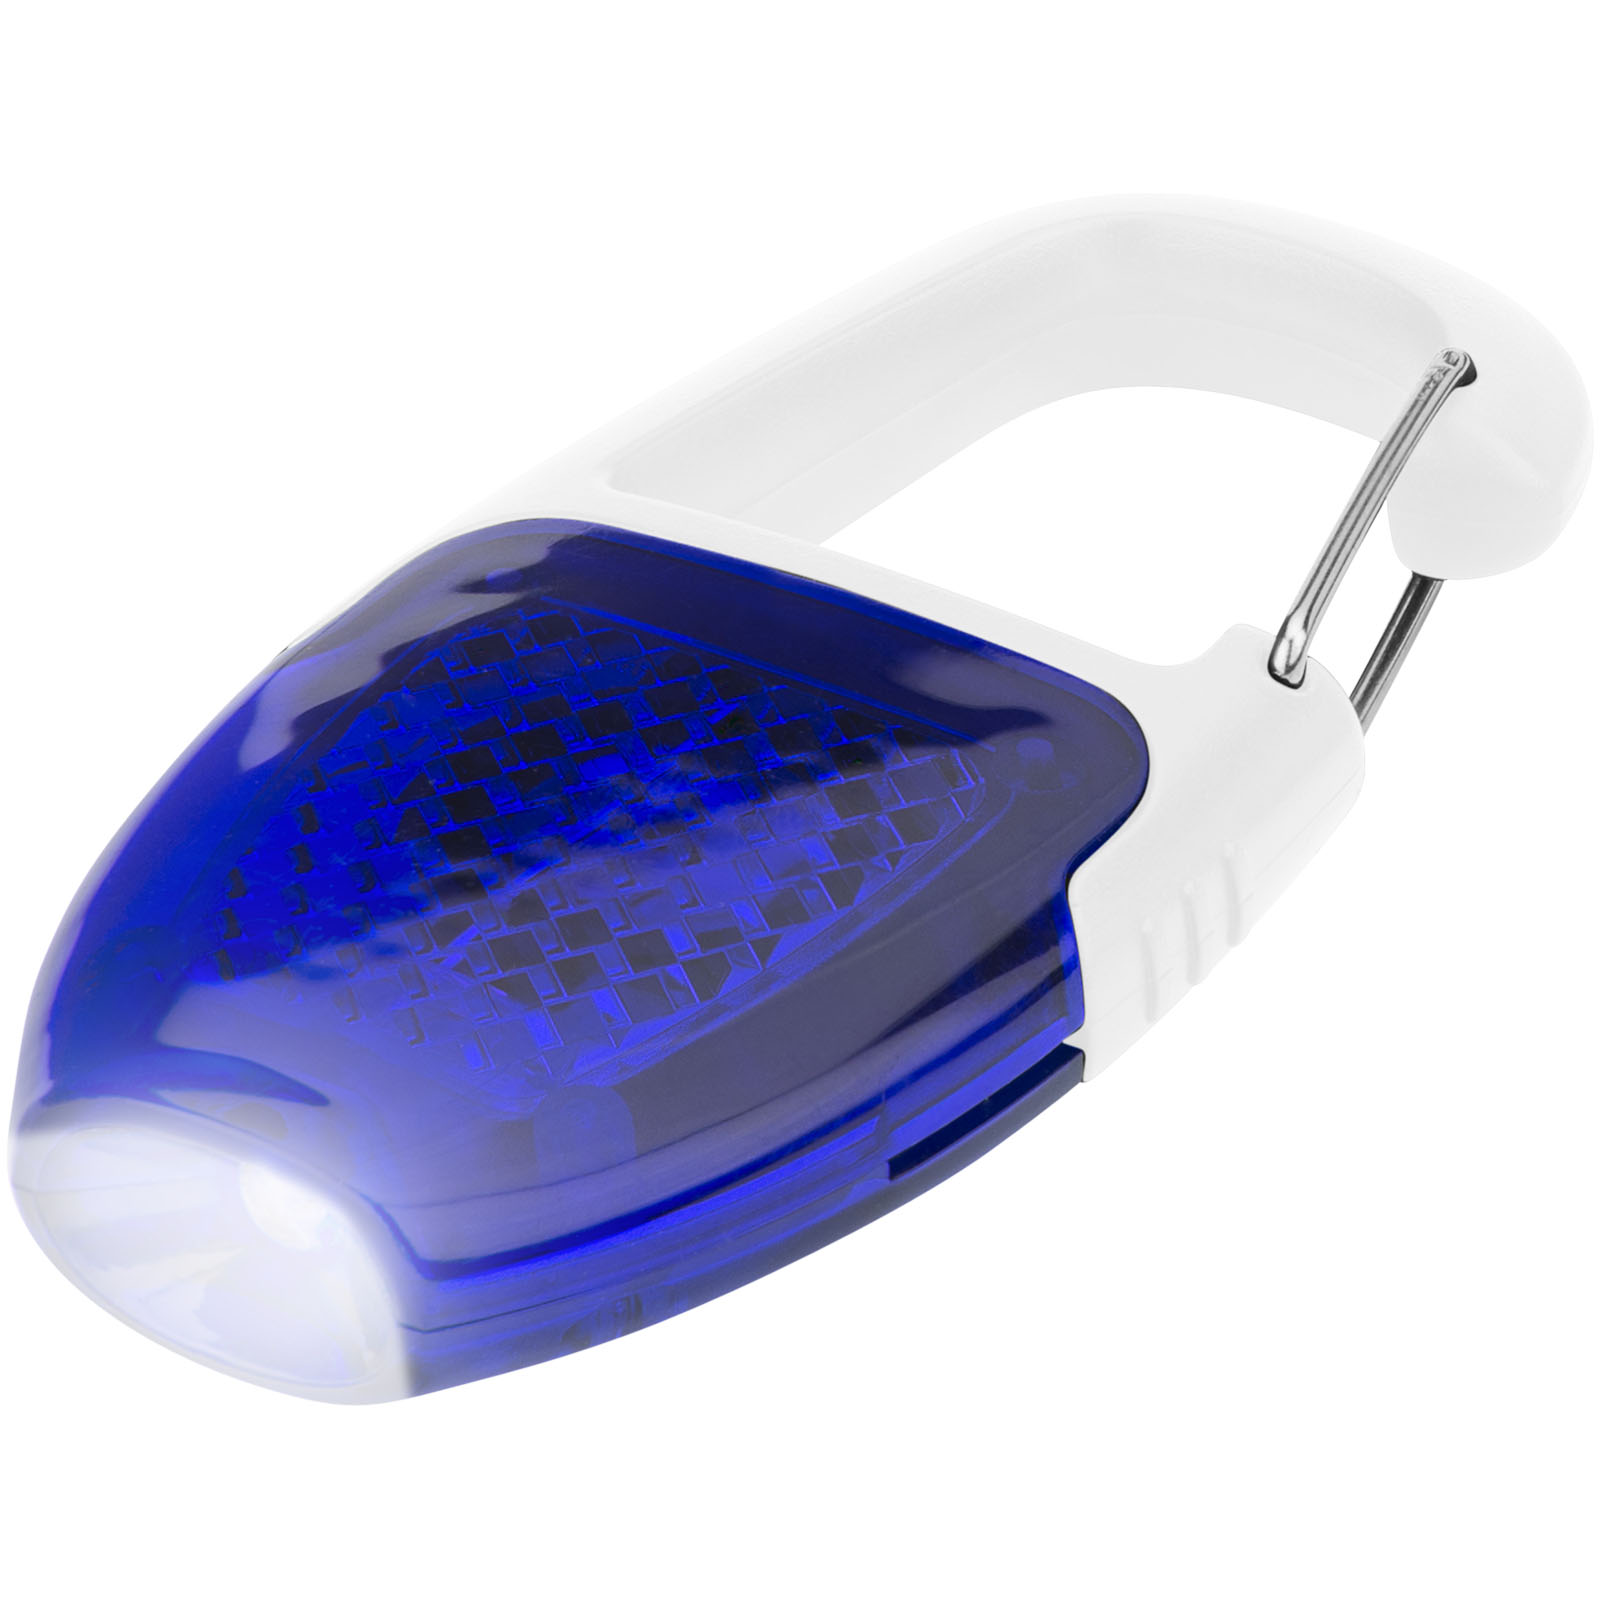 Reflective Carabiner with Chrome Clip and LED Light - Little Snoring - Abbeythorpe